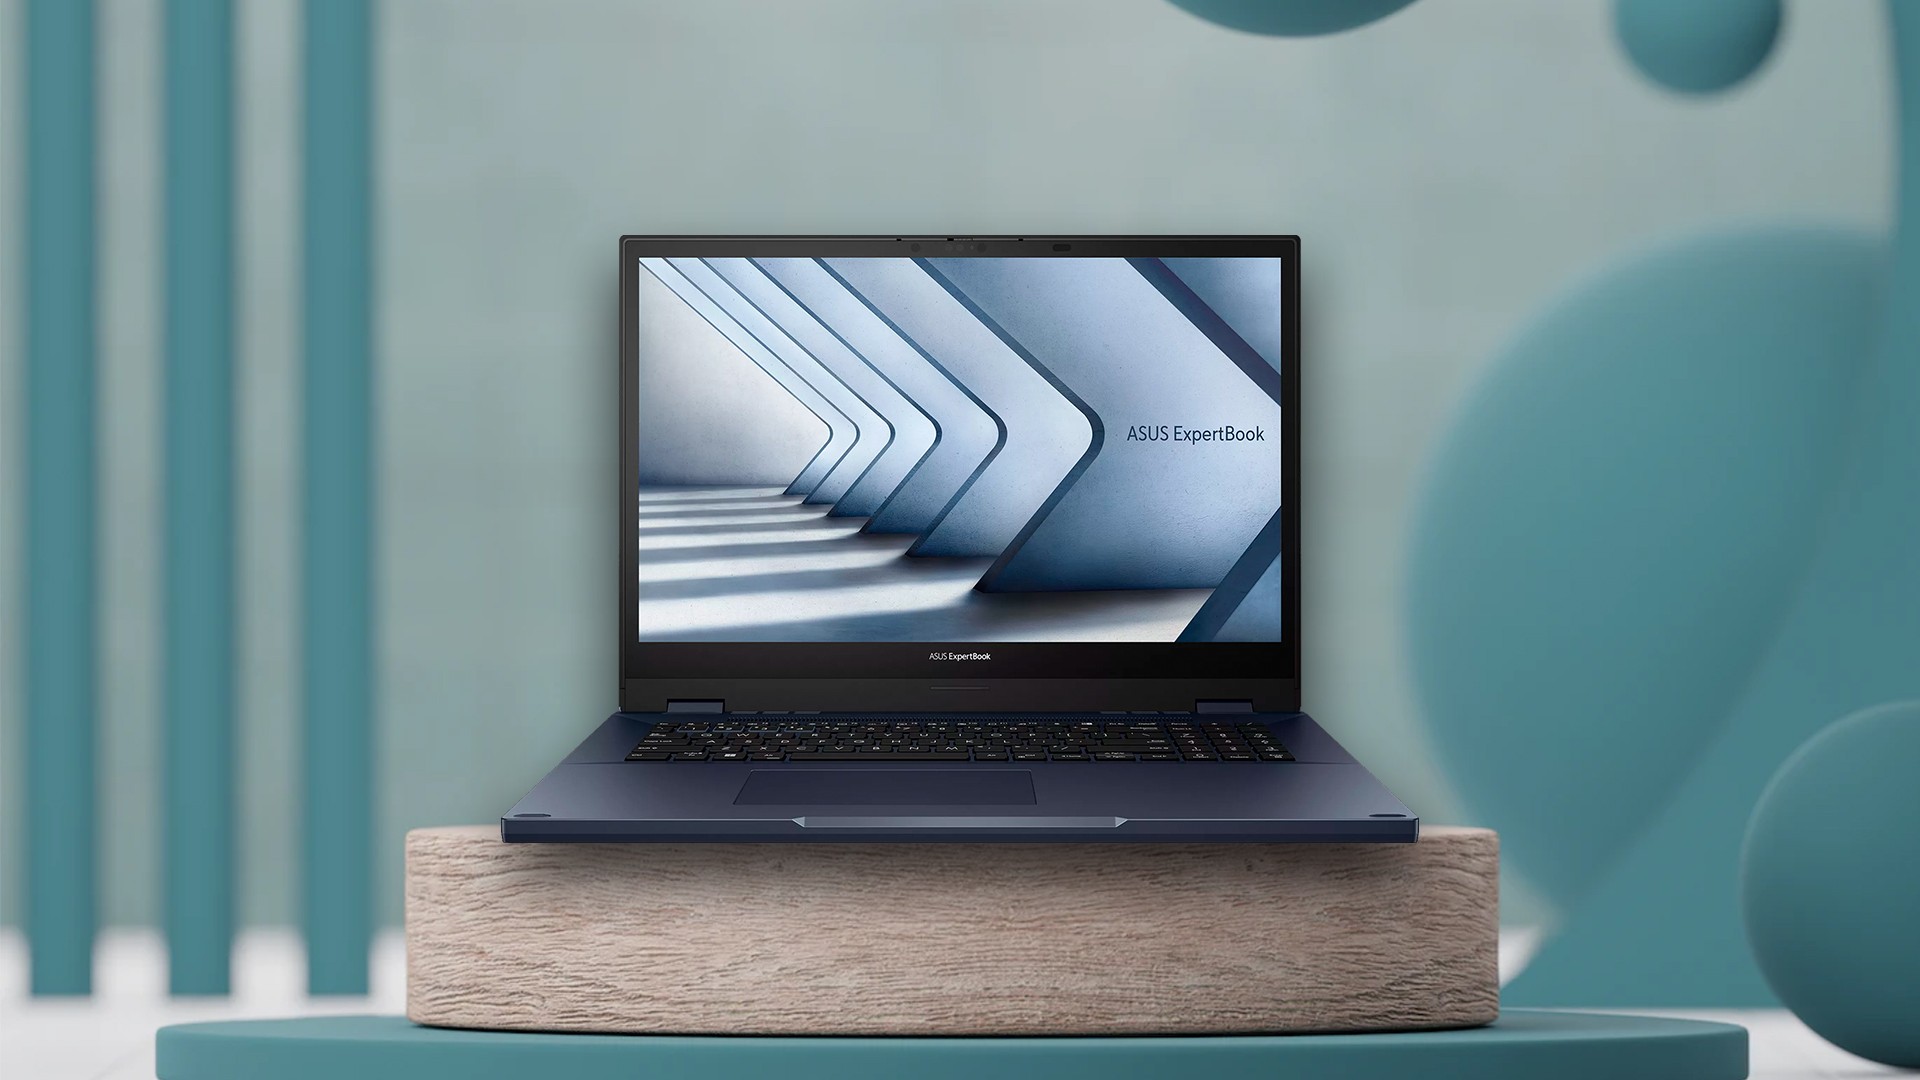 ASUS Announces ExpertBook Professional Notebooks With 12th Gen Intel Core and More